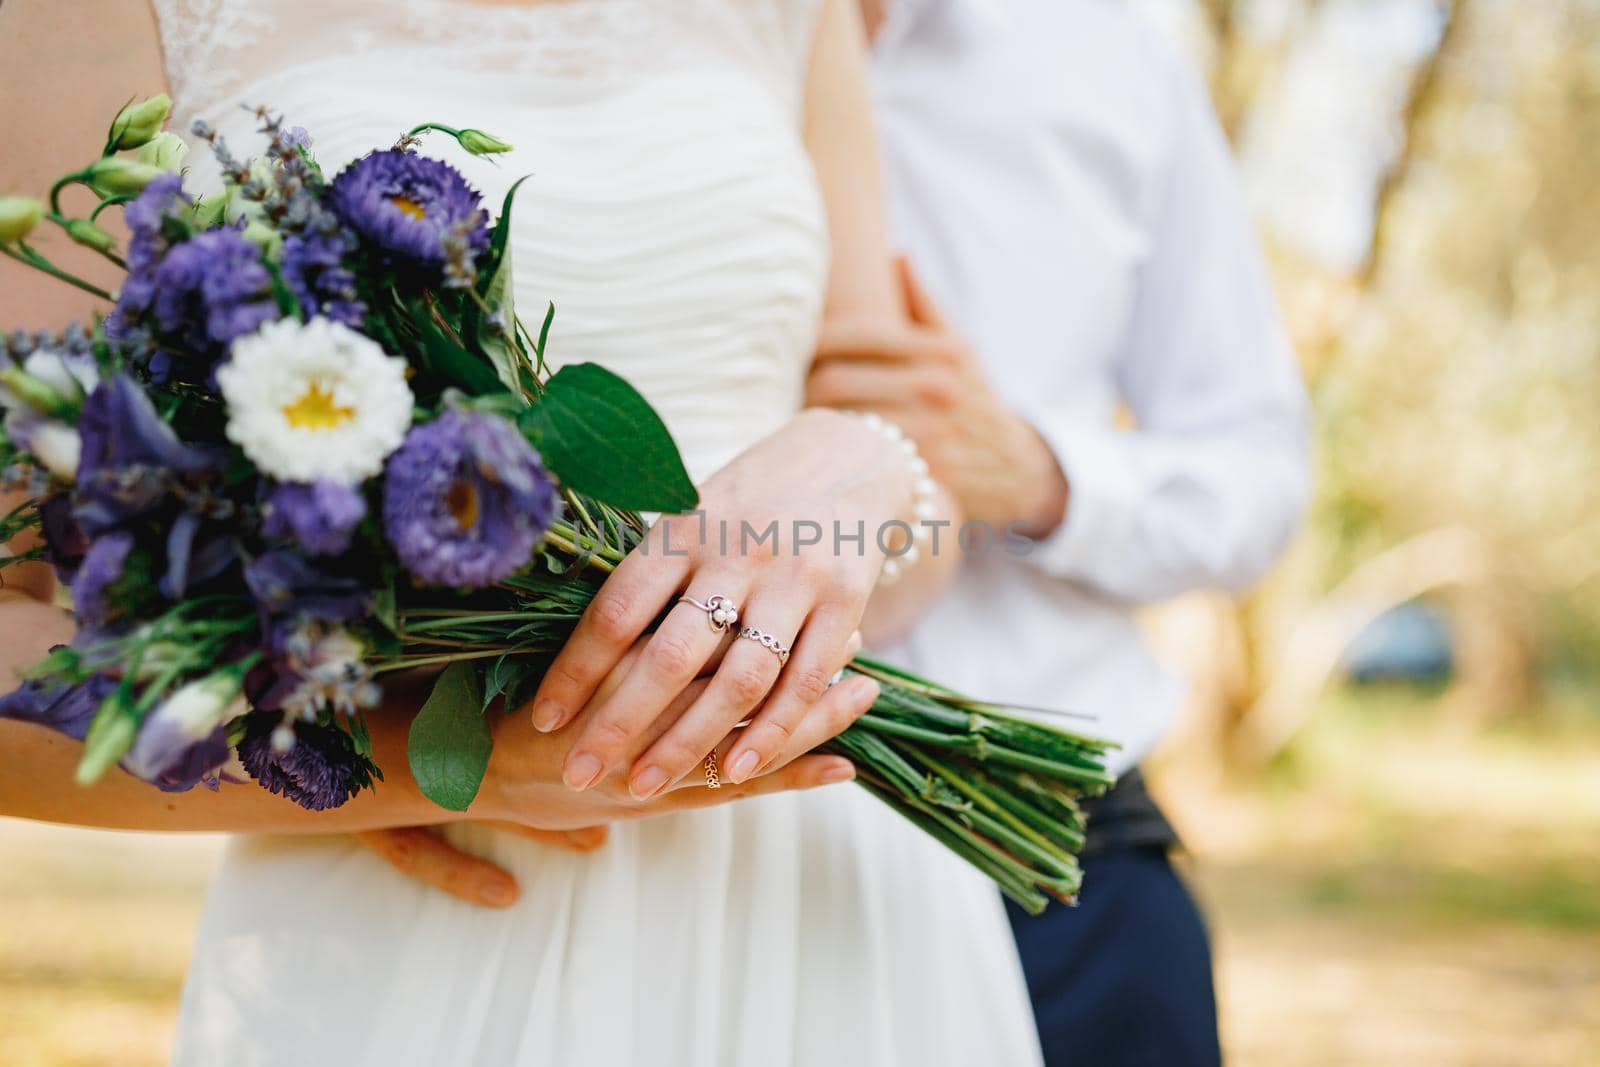 The groom gently hugs the bride in the olive grove, the bride holds a bouquet of blue flowers, close-up. High quality photo